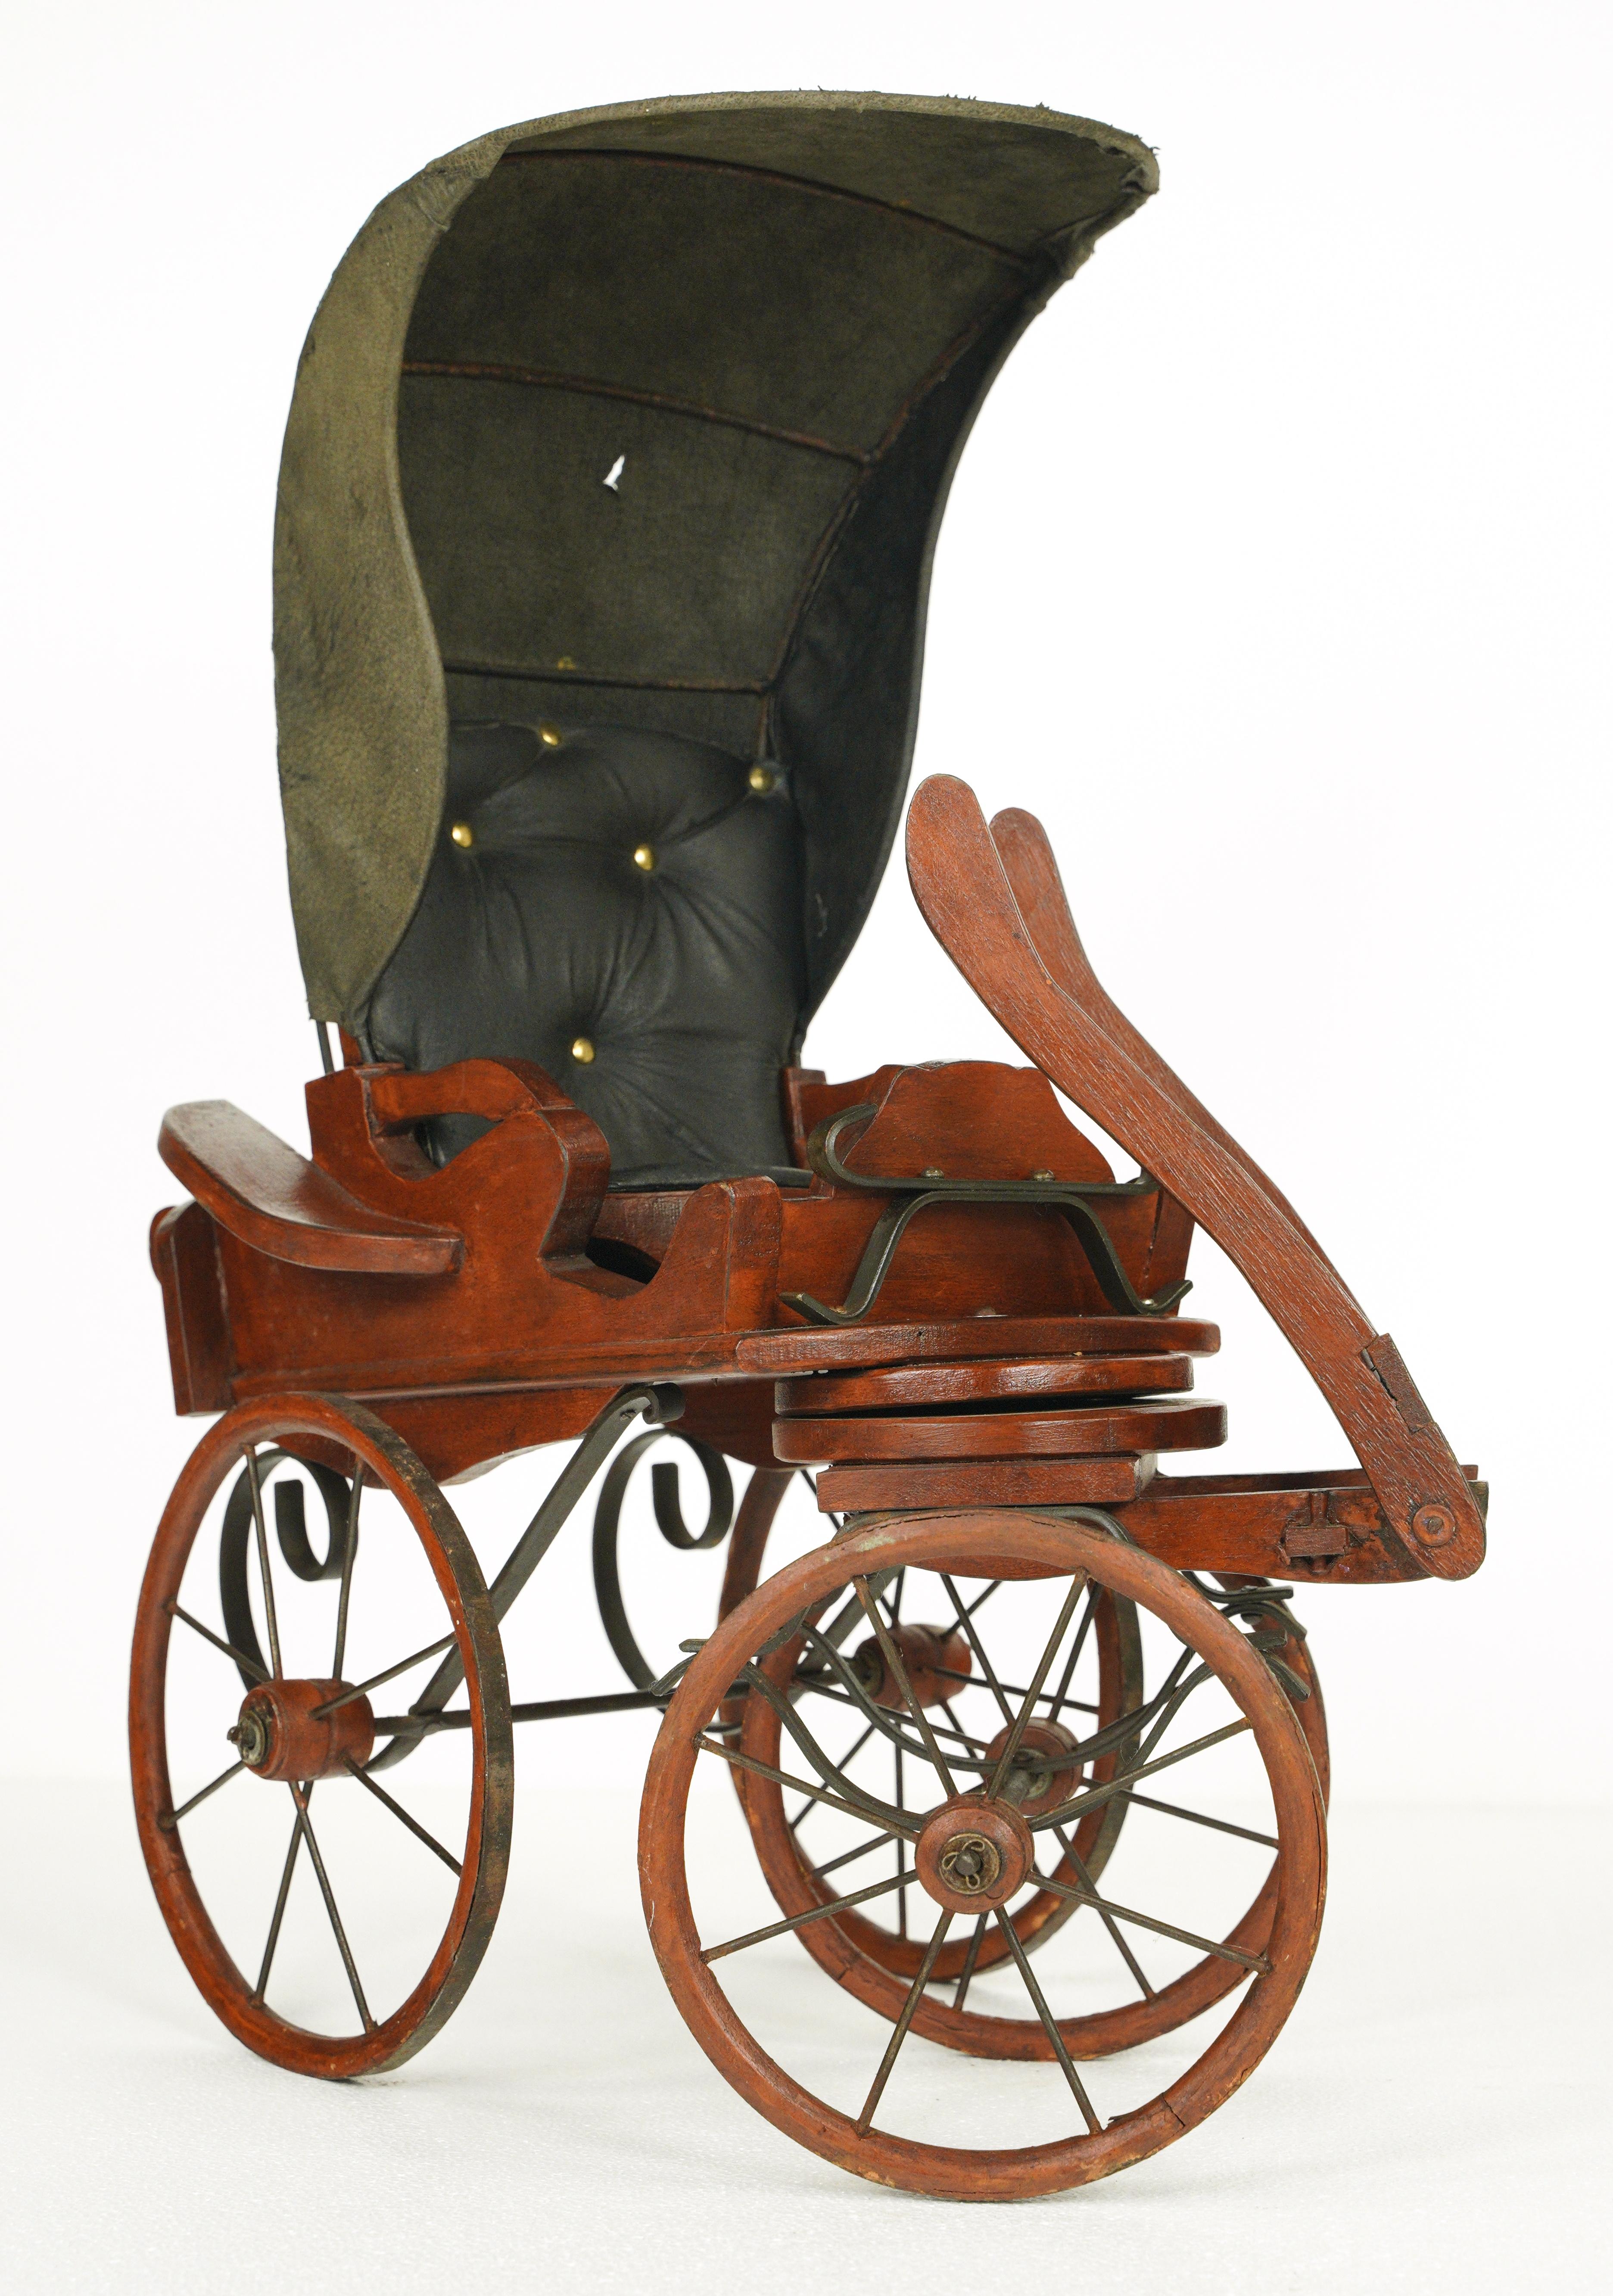 20th Century mahogany stained wood toy stagecoach carriage buggy with a black leather seat and hood. The wheels turn and pivot. Good condition with appropriate wear from age, with a minor tear in the leather and slight scratches. One available.